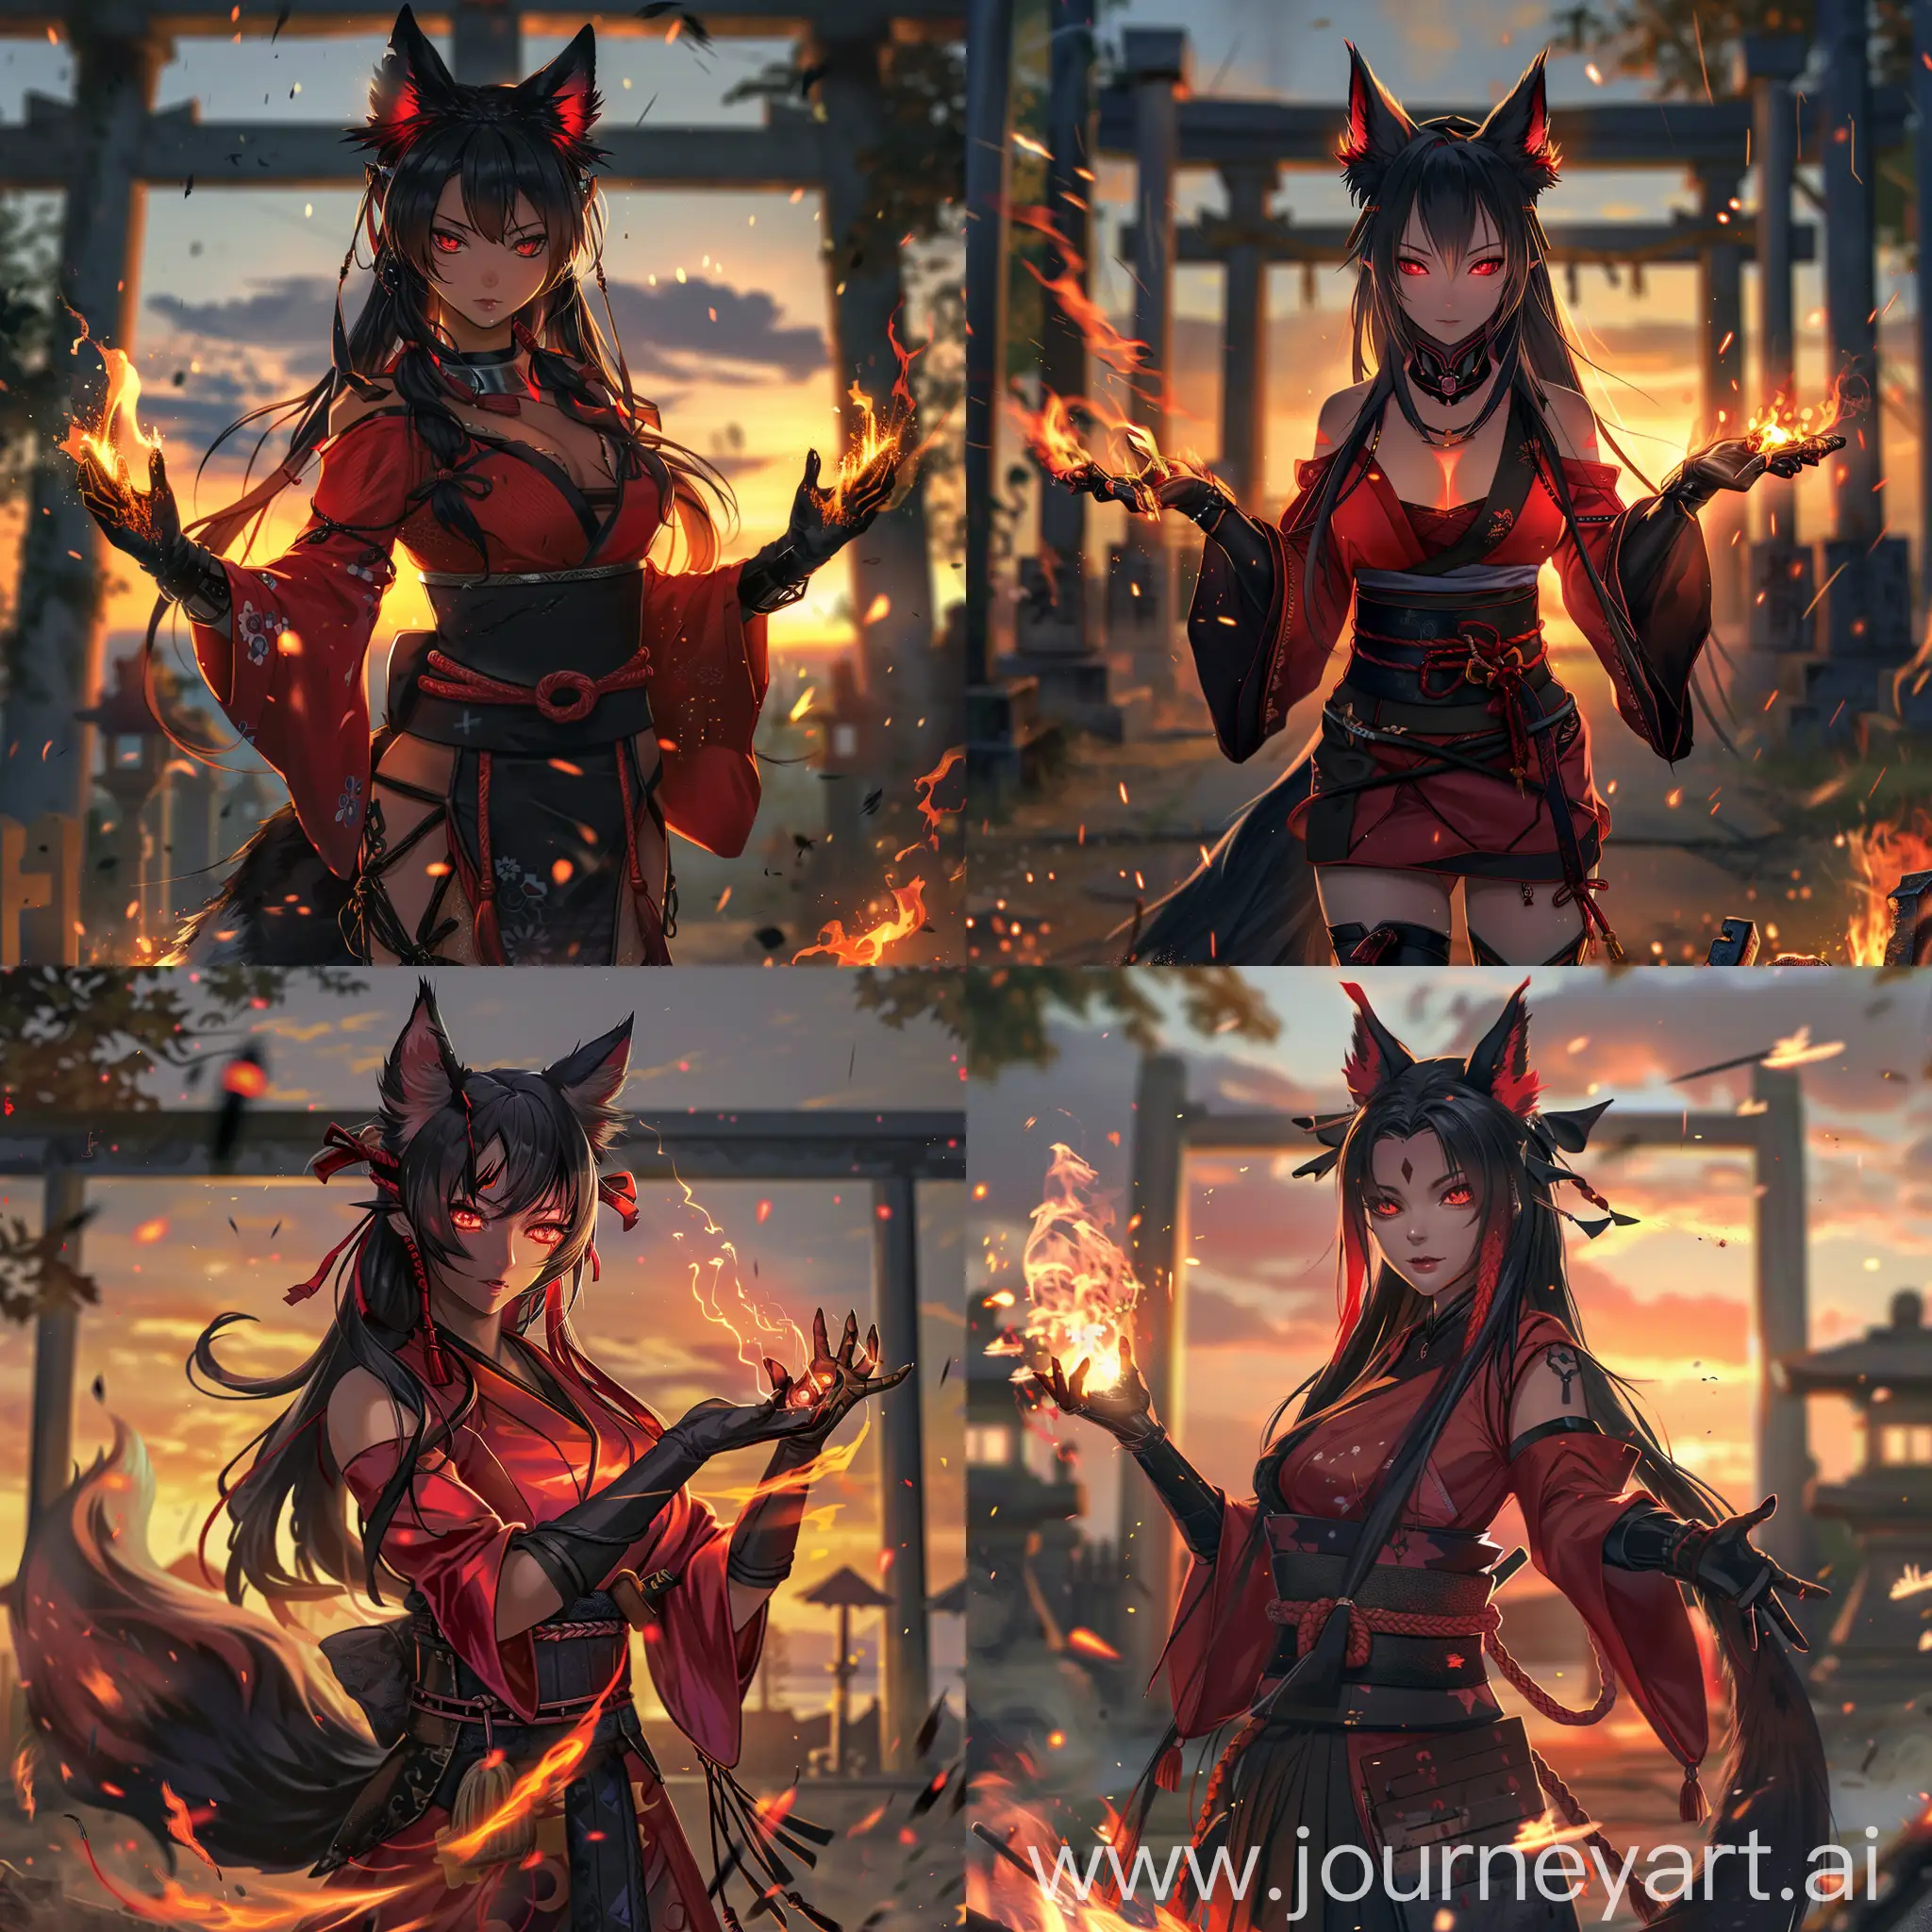 anime-style, full body, athletic, beautiful, tan skin, asian woman, long black hair with red highlights, black fox ears with red tips, black fox tail with red tip attached to her waist, fiery red eyes, wearing a red kimono, black hakama, black sash, long black gloves, black leather boots, casting fire magic, hands wrapped in fire,  good anatomy, dynamic, embers falling in foreground, shinto shrine, sunset